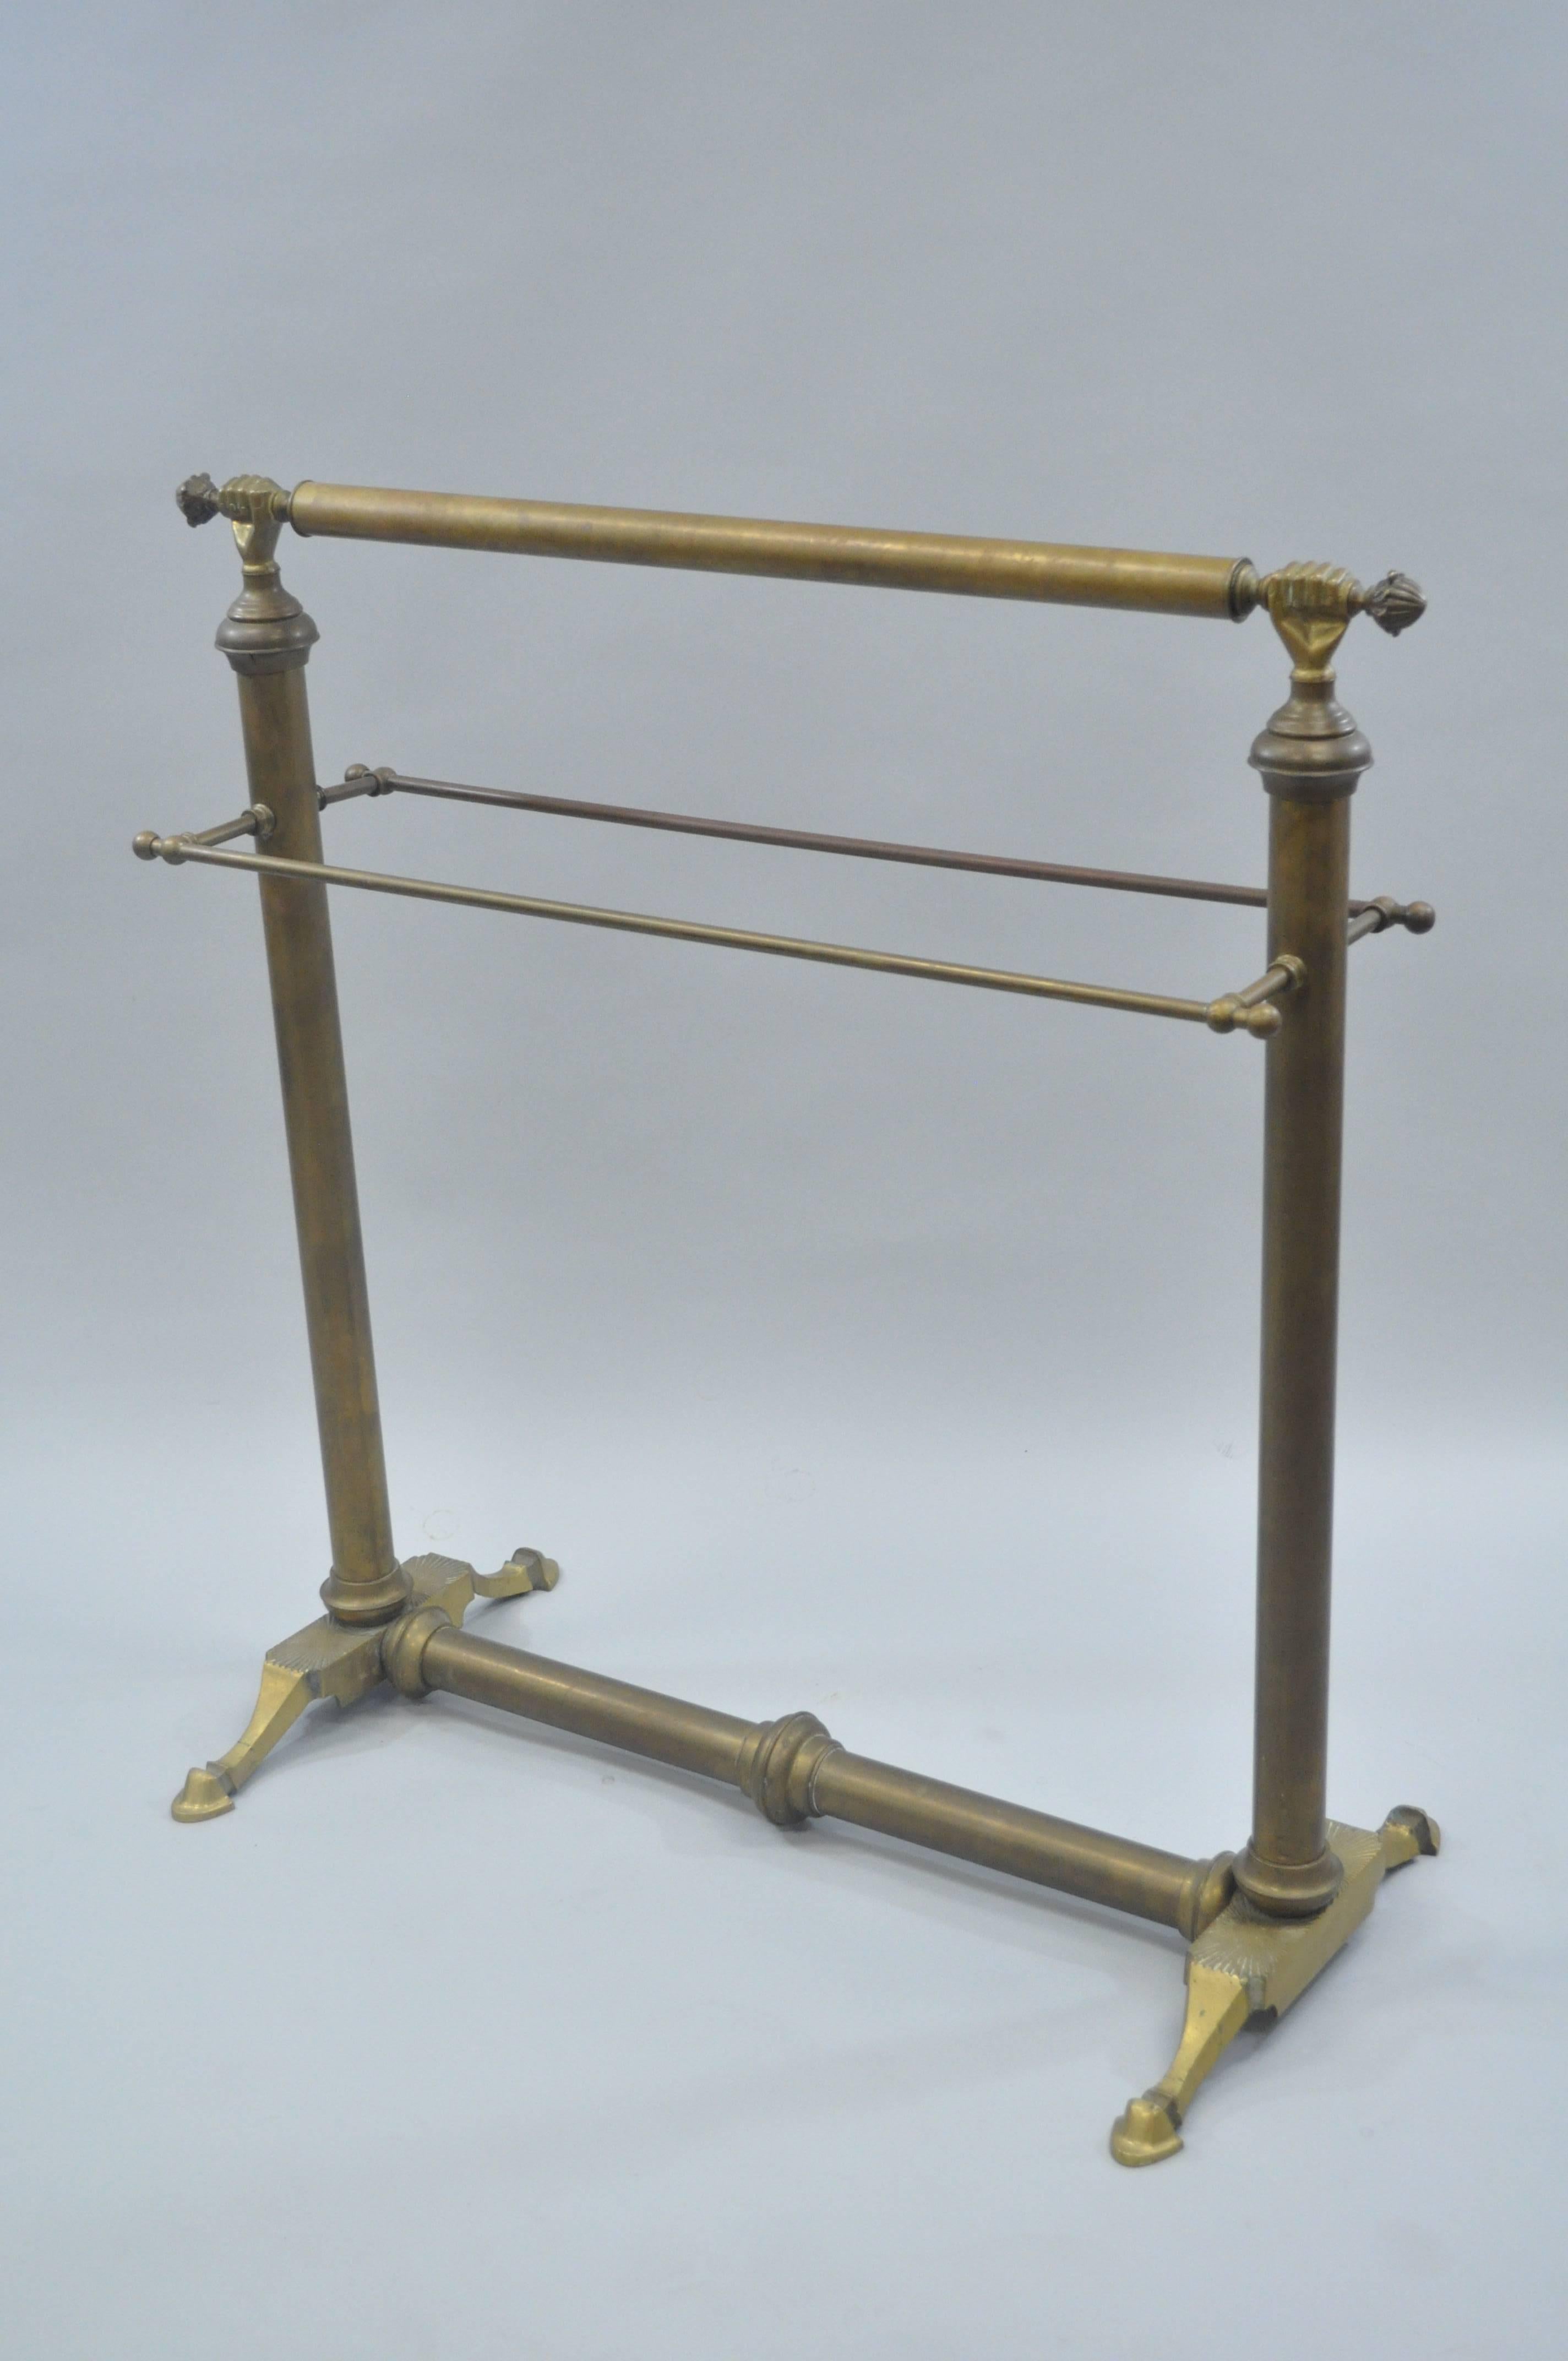 Clasped Hands Victorian Andre Arbus Style Brass Quilt Towel Rack Stand Holder 2